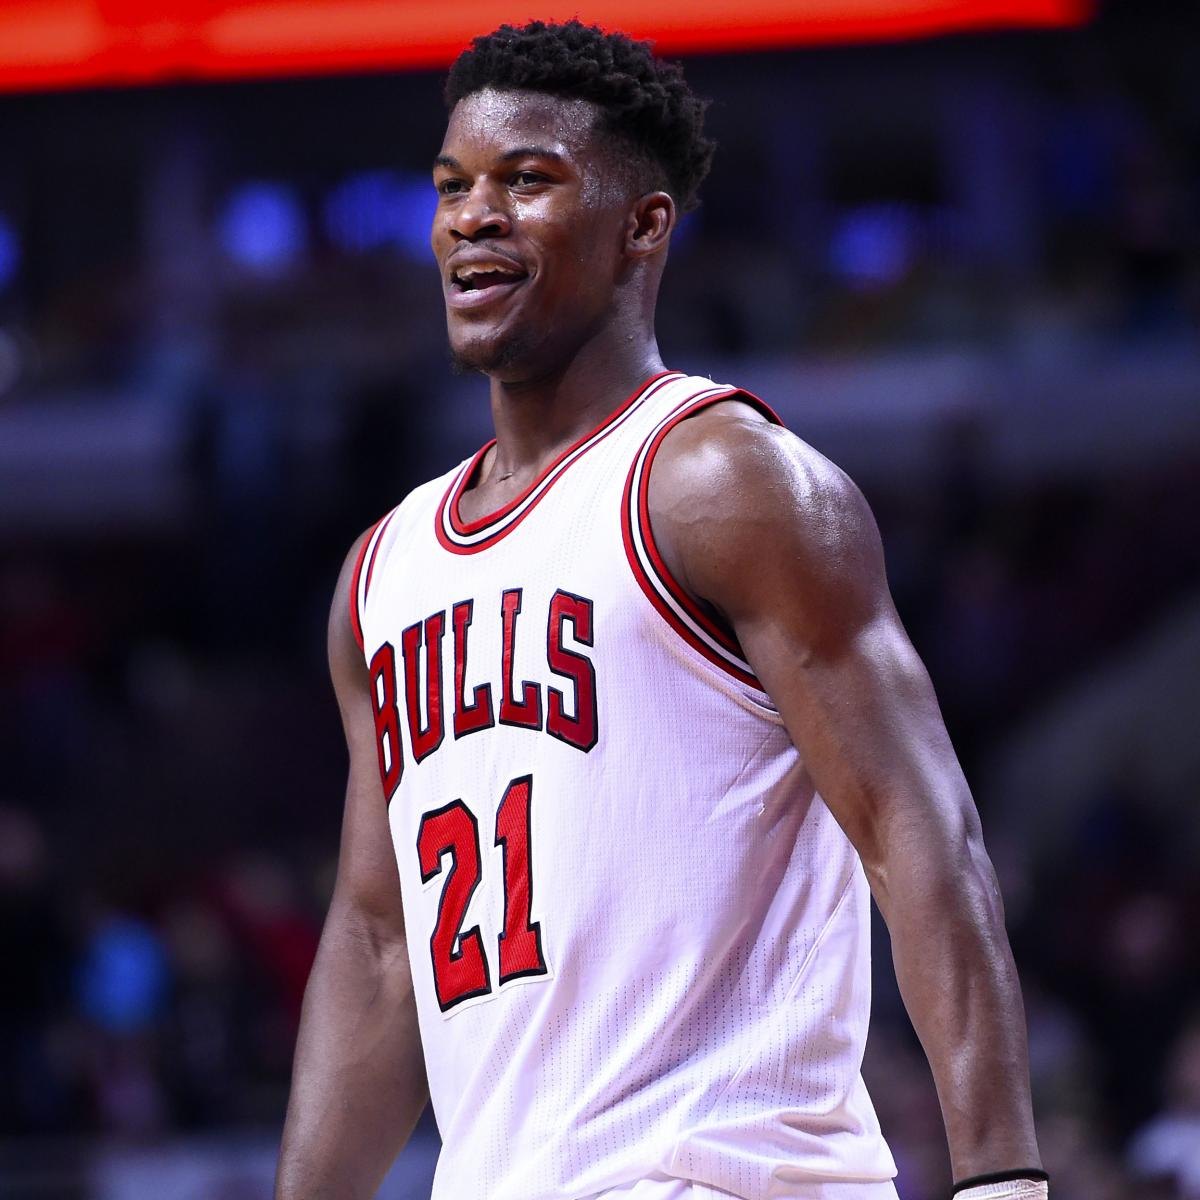 Jimmy Butler, Joakim Noah Reportedly Had Several Arguments in